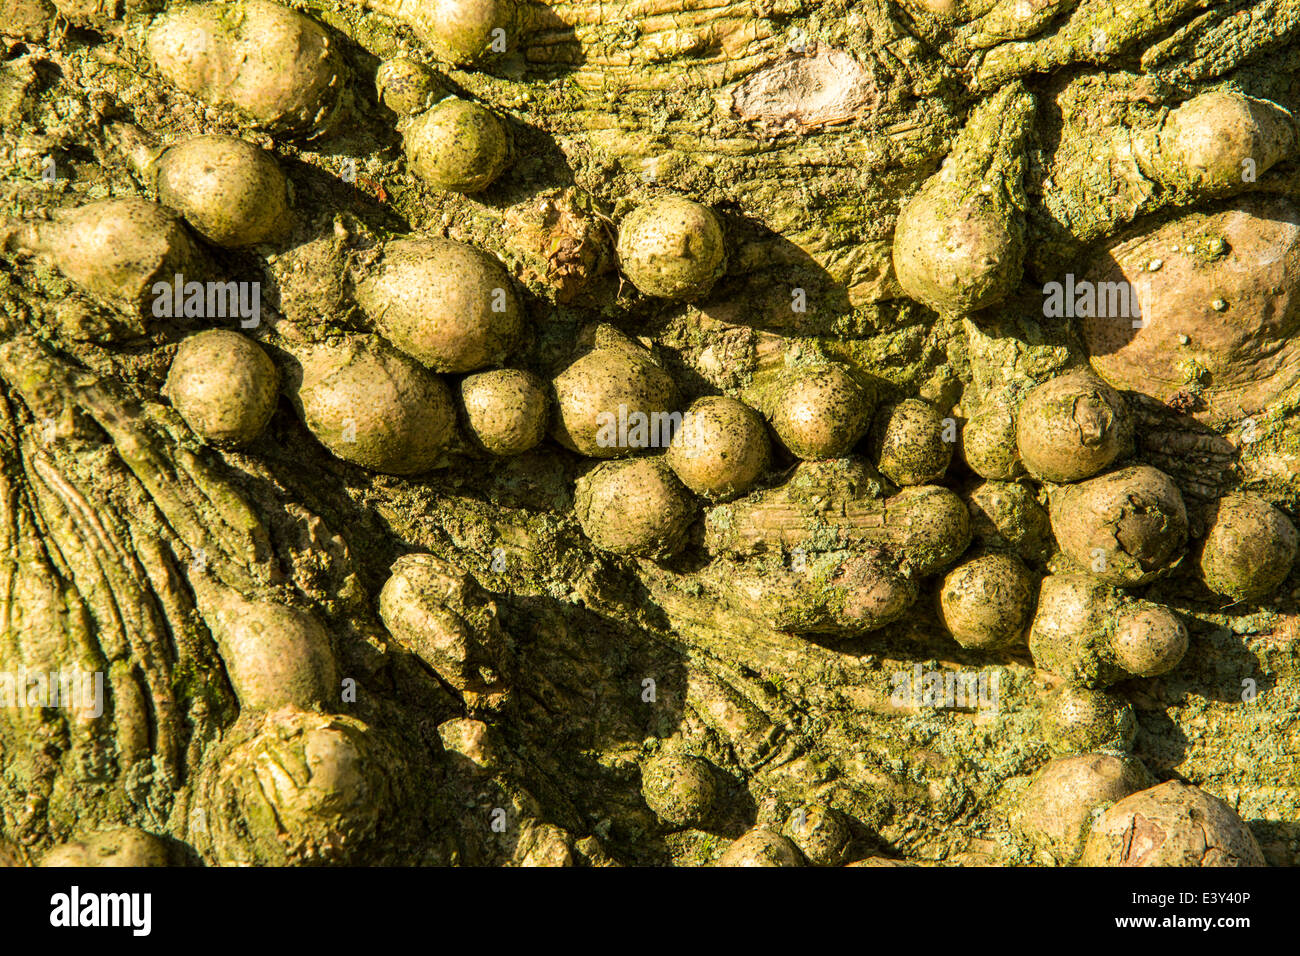 Knobbly growths on a Holly tree trunk in Holehird Gardens, Windermere, Cumbria, UK. Stock Photo